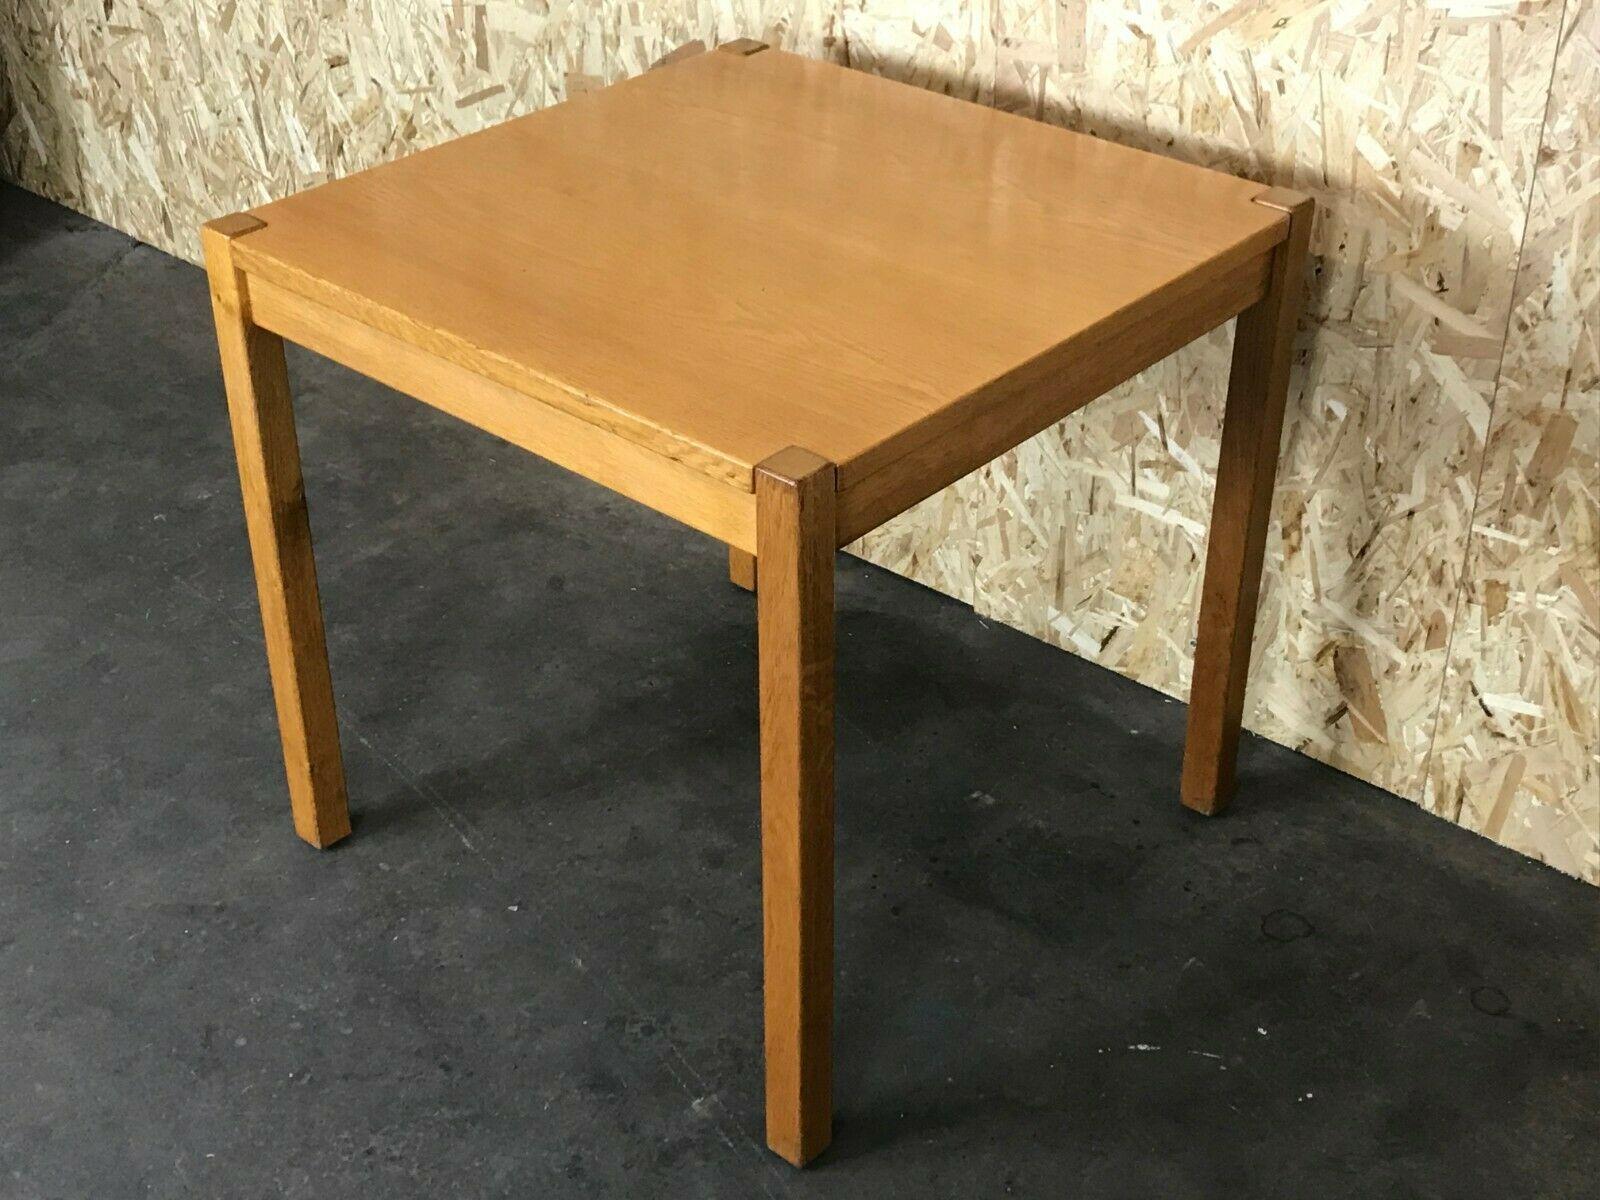 60s 70s Oak dining table Danish Modern Design Denmark 60s

Object: dining table / dining table

Manufacturer:

Condition: good

Age: around 1960-1970

Dimensions:

75cm x 75cm x 73cm

Other notes:

The pictures serve as part of the